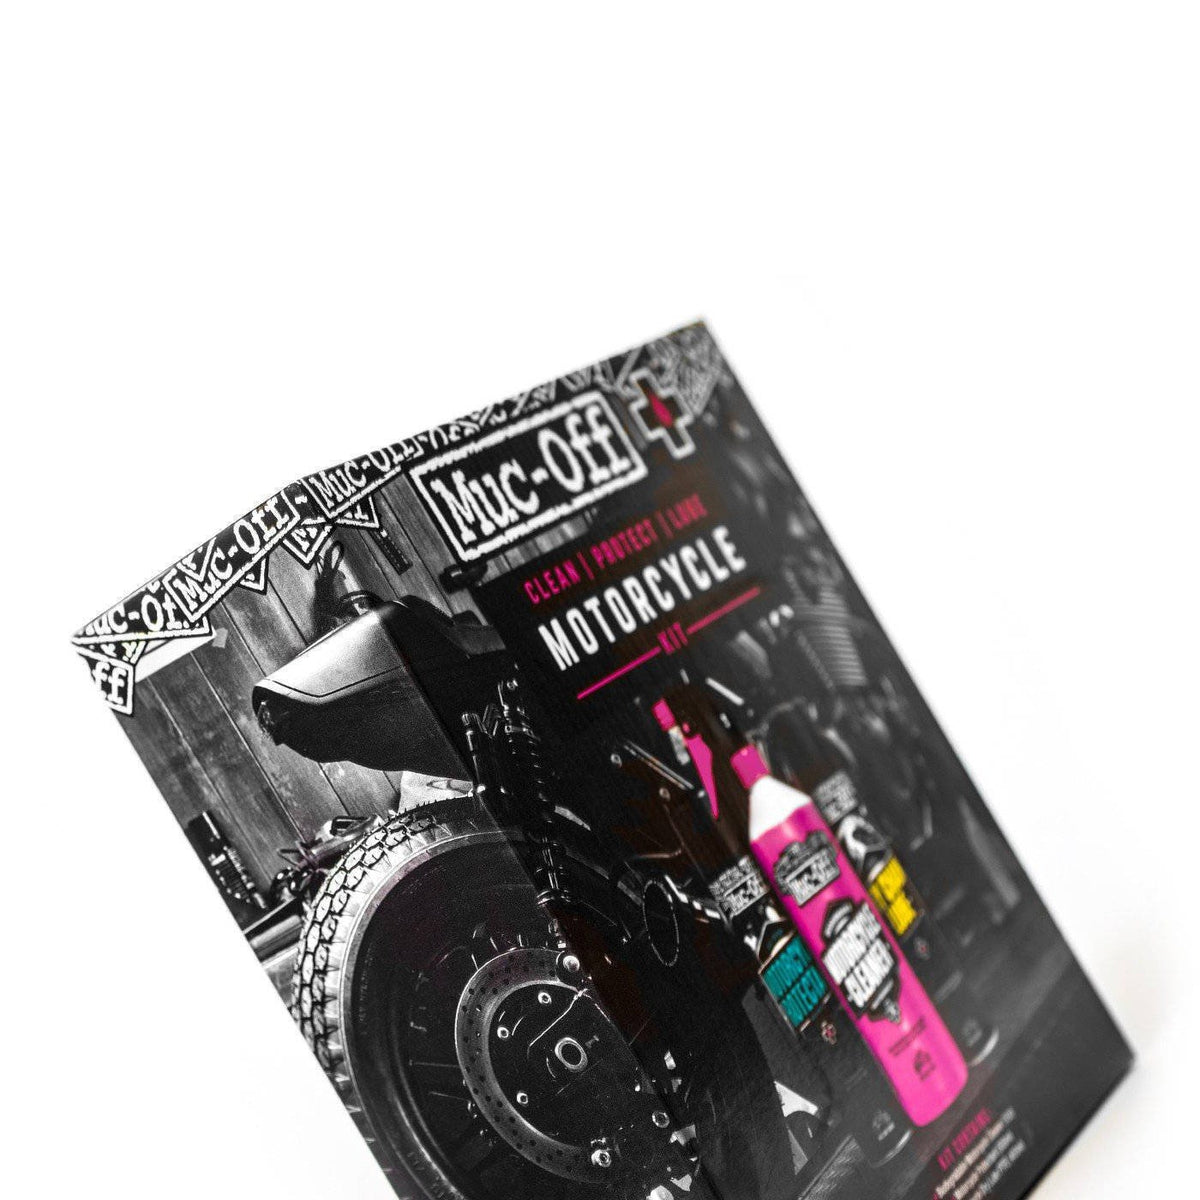 Muc-Off Motorcycle Clean Protect &amp; Lube Kit